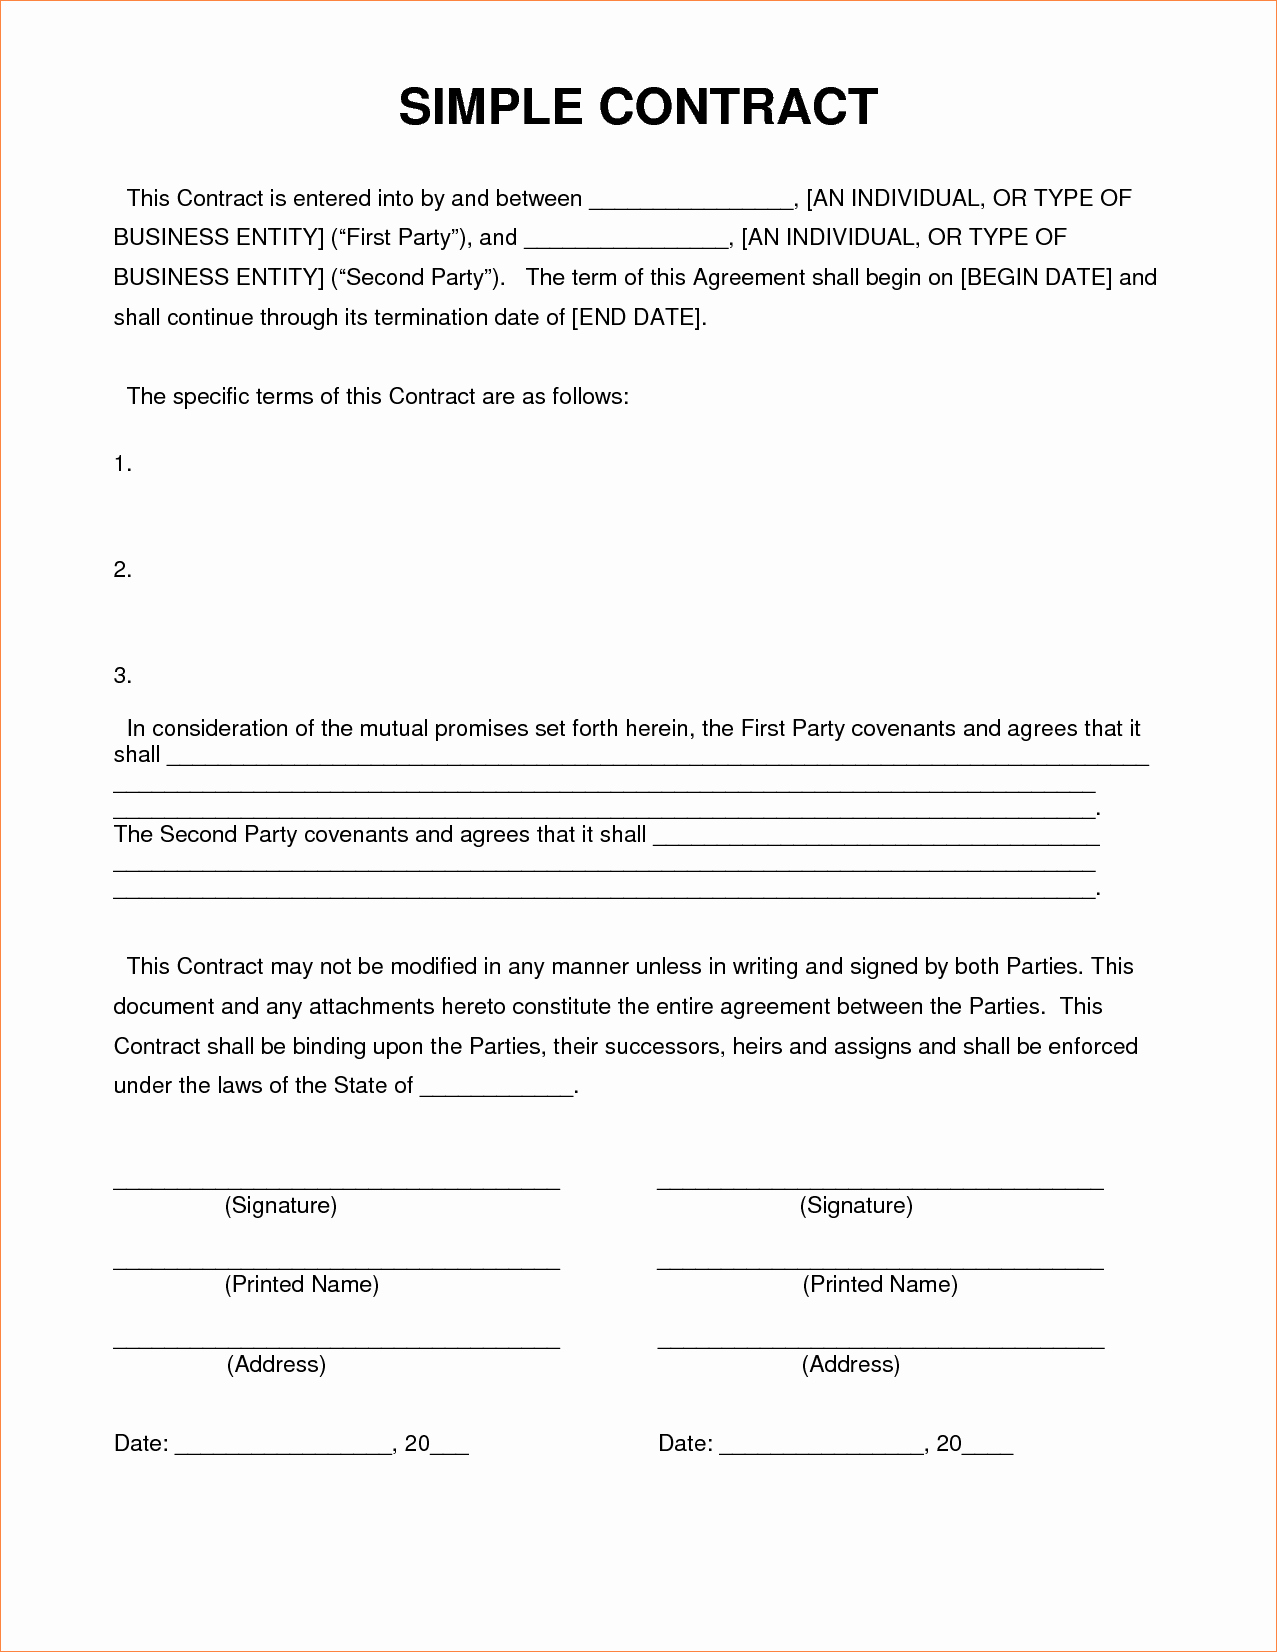 Construction Contract Template Free Lovely Simple Construction Contract Free Download